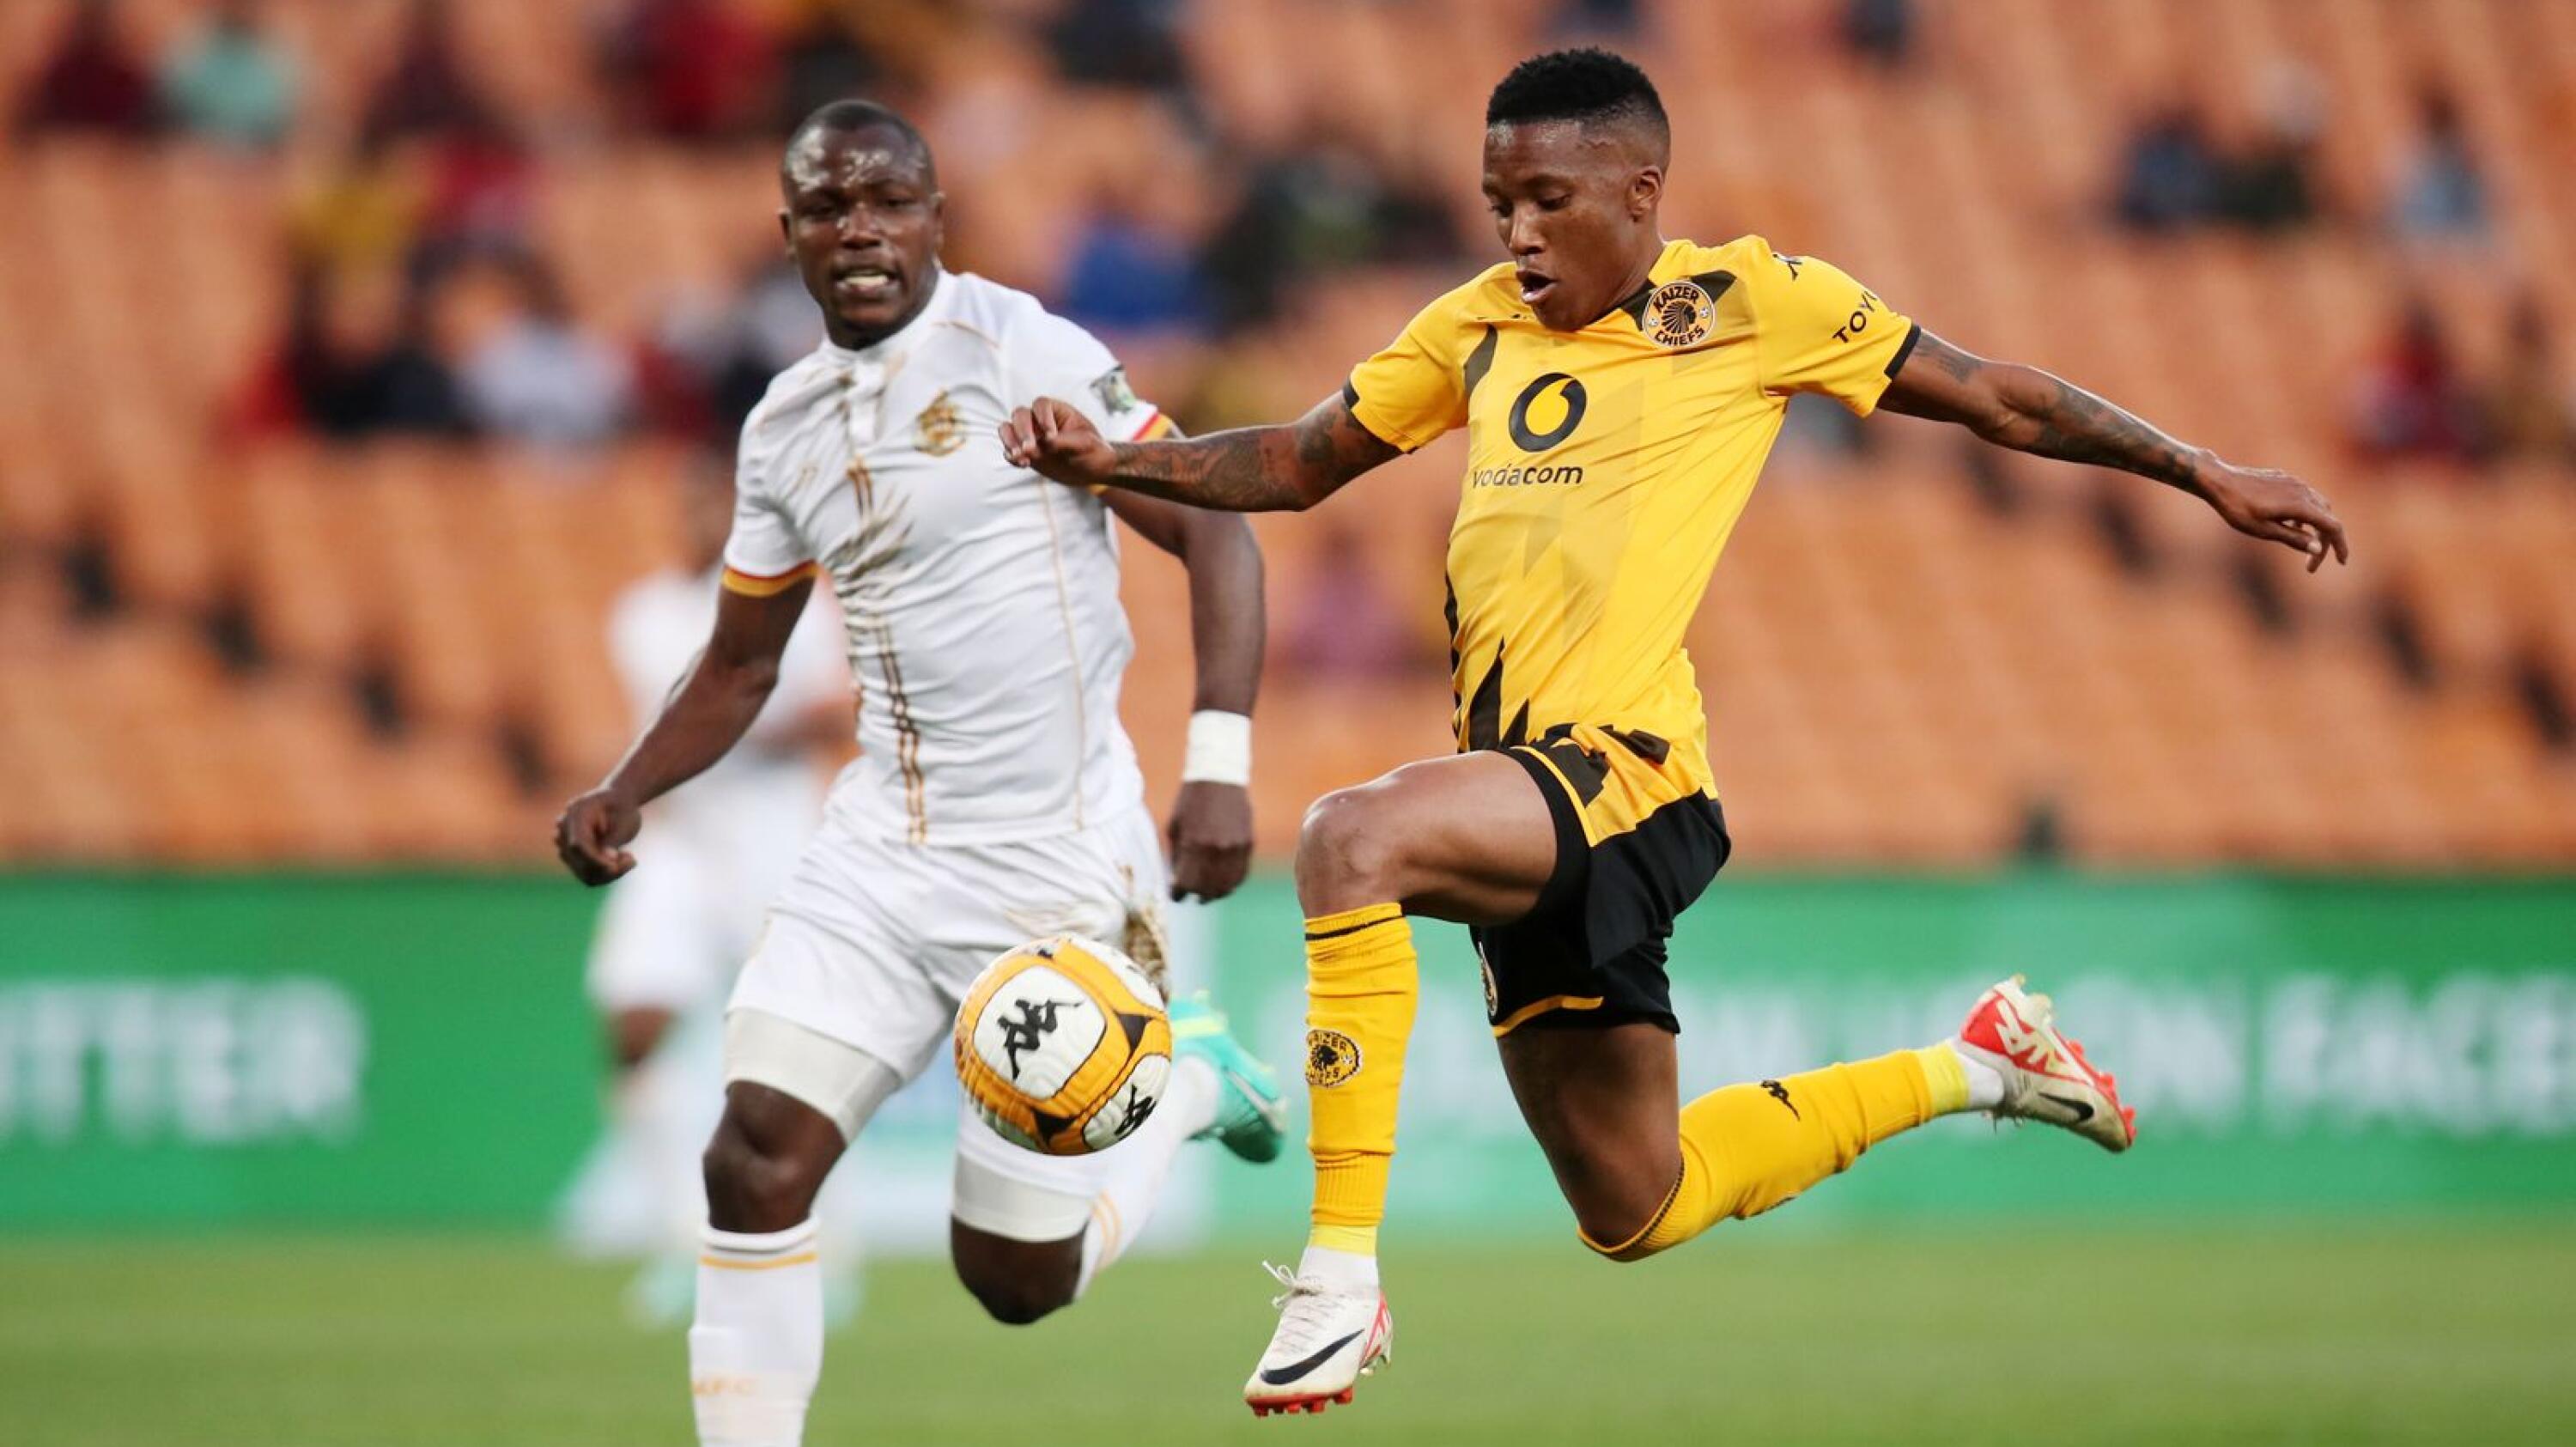 Pule Mmodi of Kaizer Chiefs is challenged by Levy Mashiane of Royal AM during their DStv Premiership match at FNB Stadium in Johannesburg on Saturday